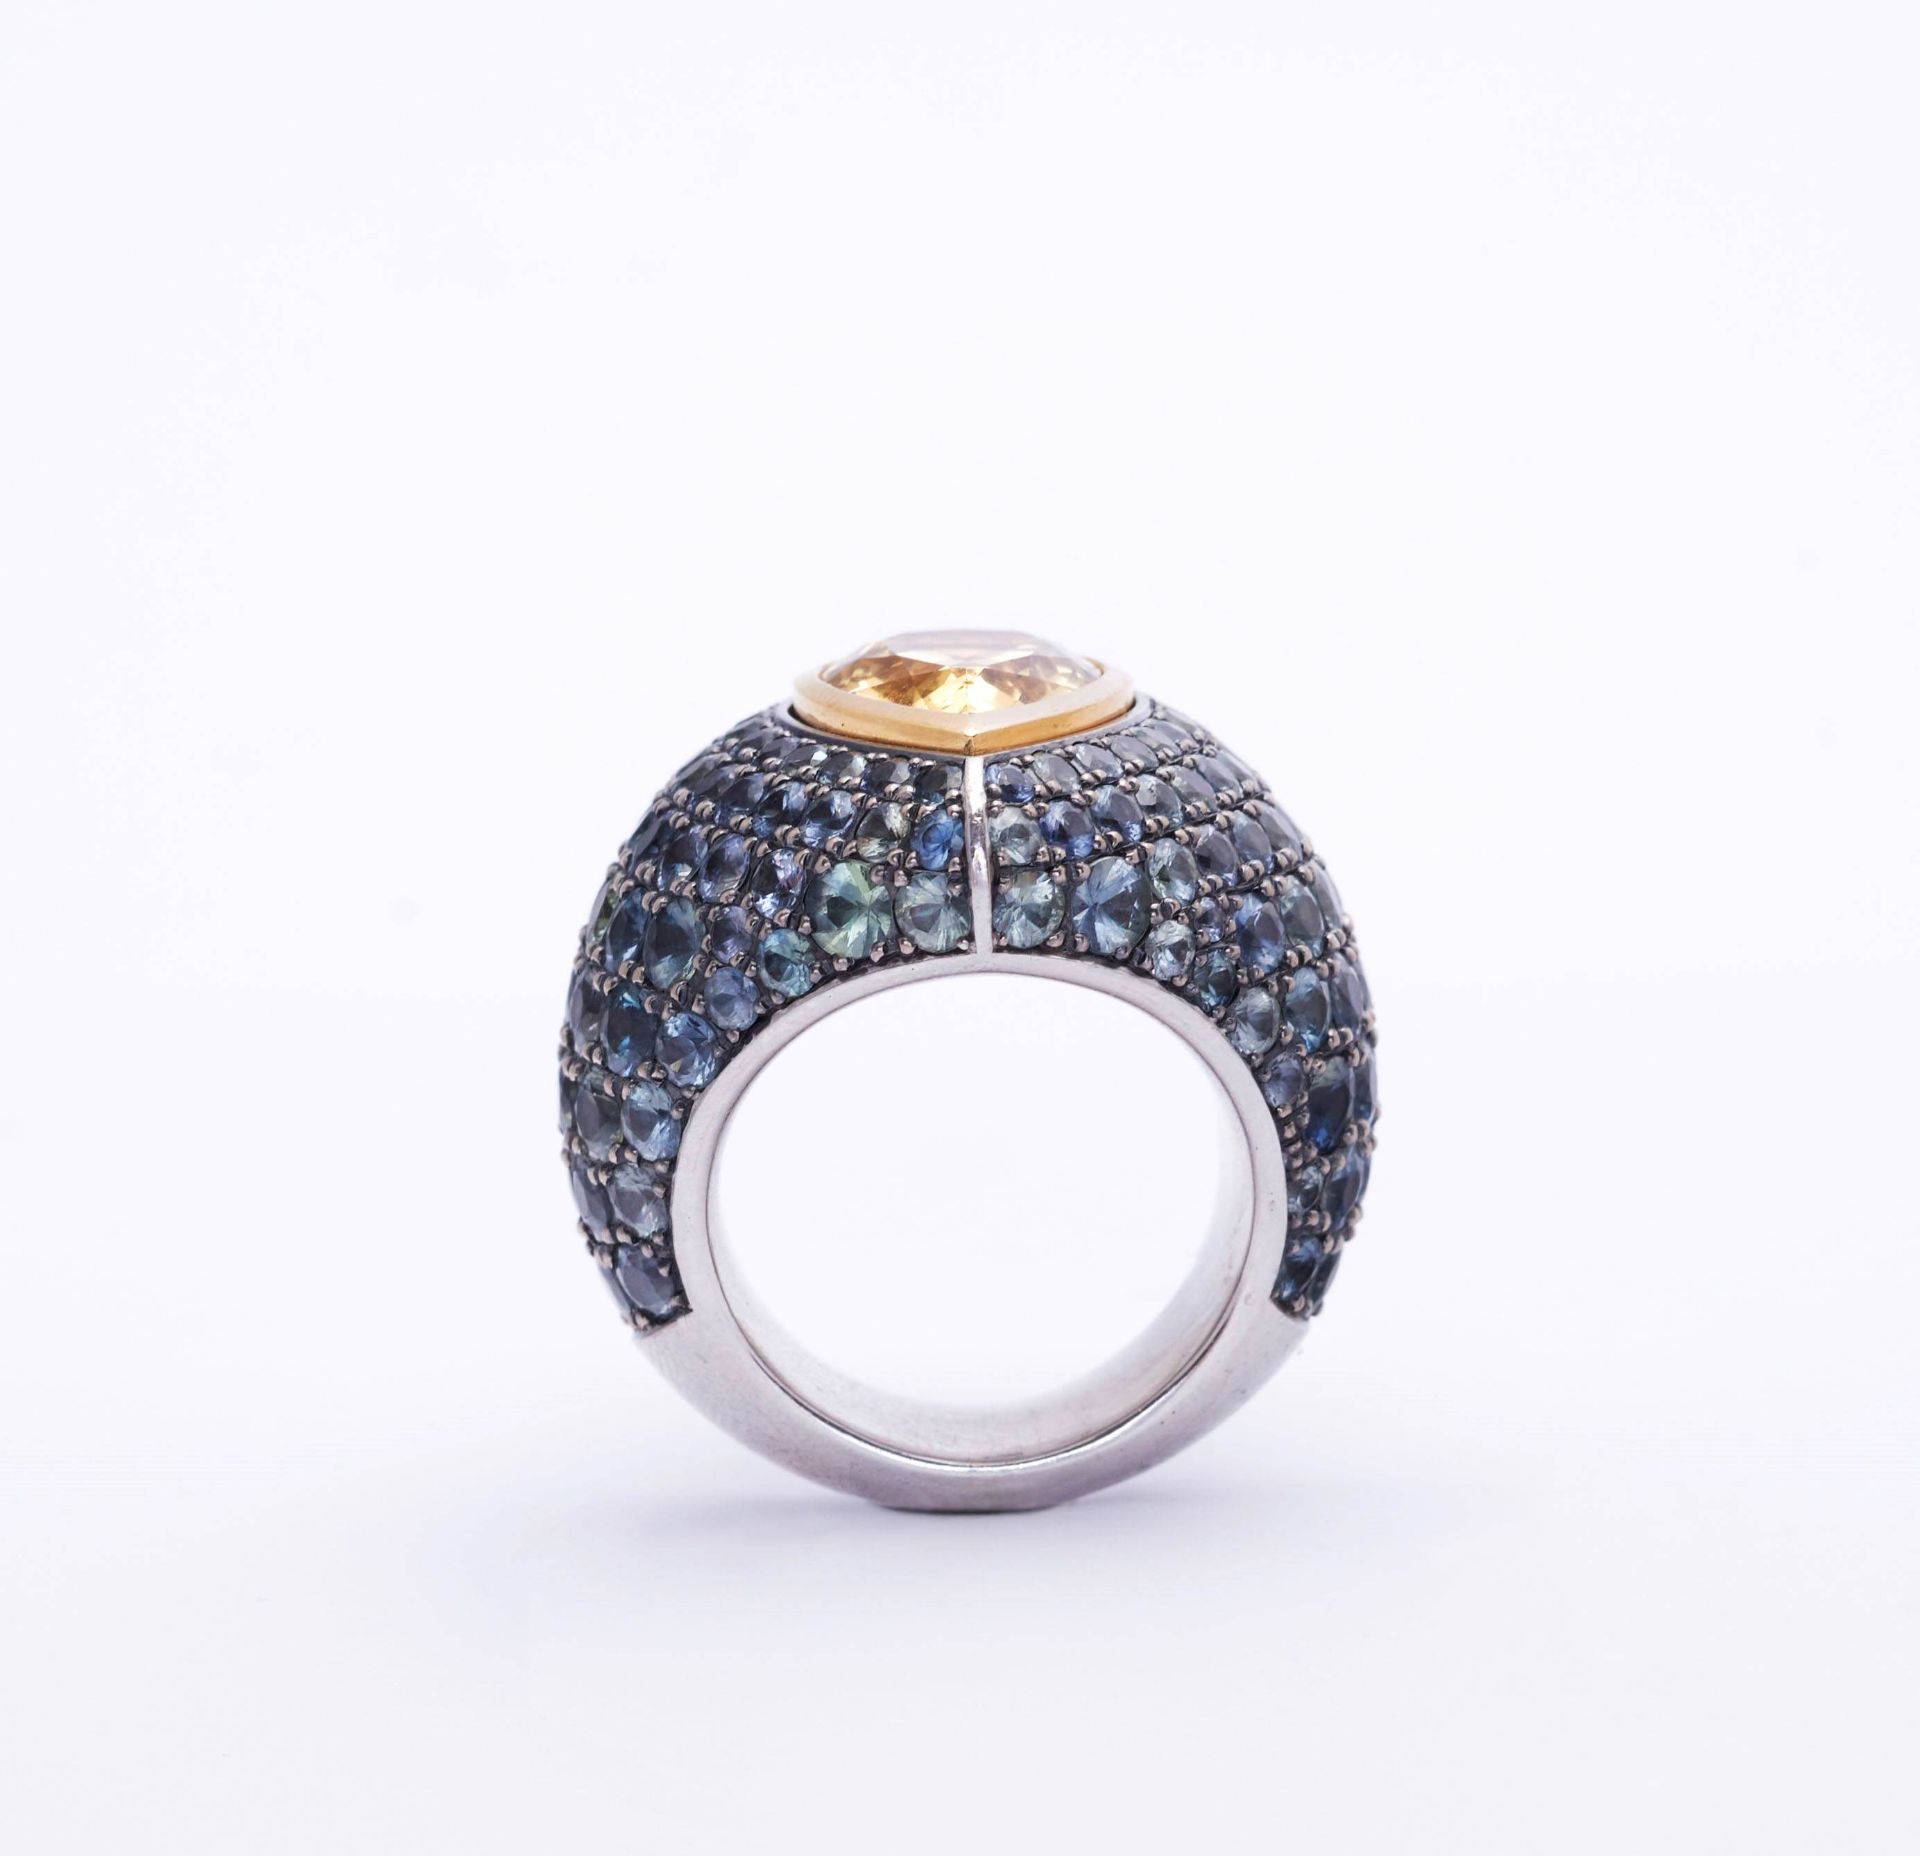 CITRINE AND SAPPHIRE RING WITH EAR PENDANTS, BY SUEÑOS. - Image 3 of 5